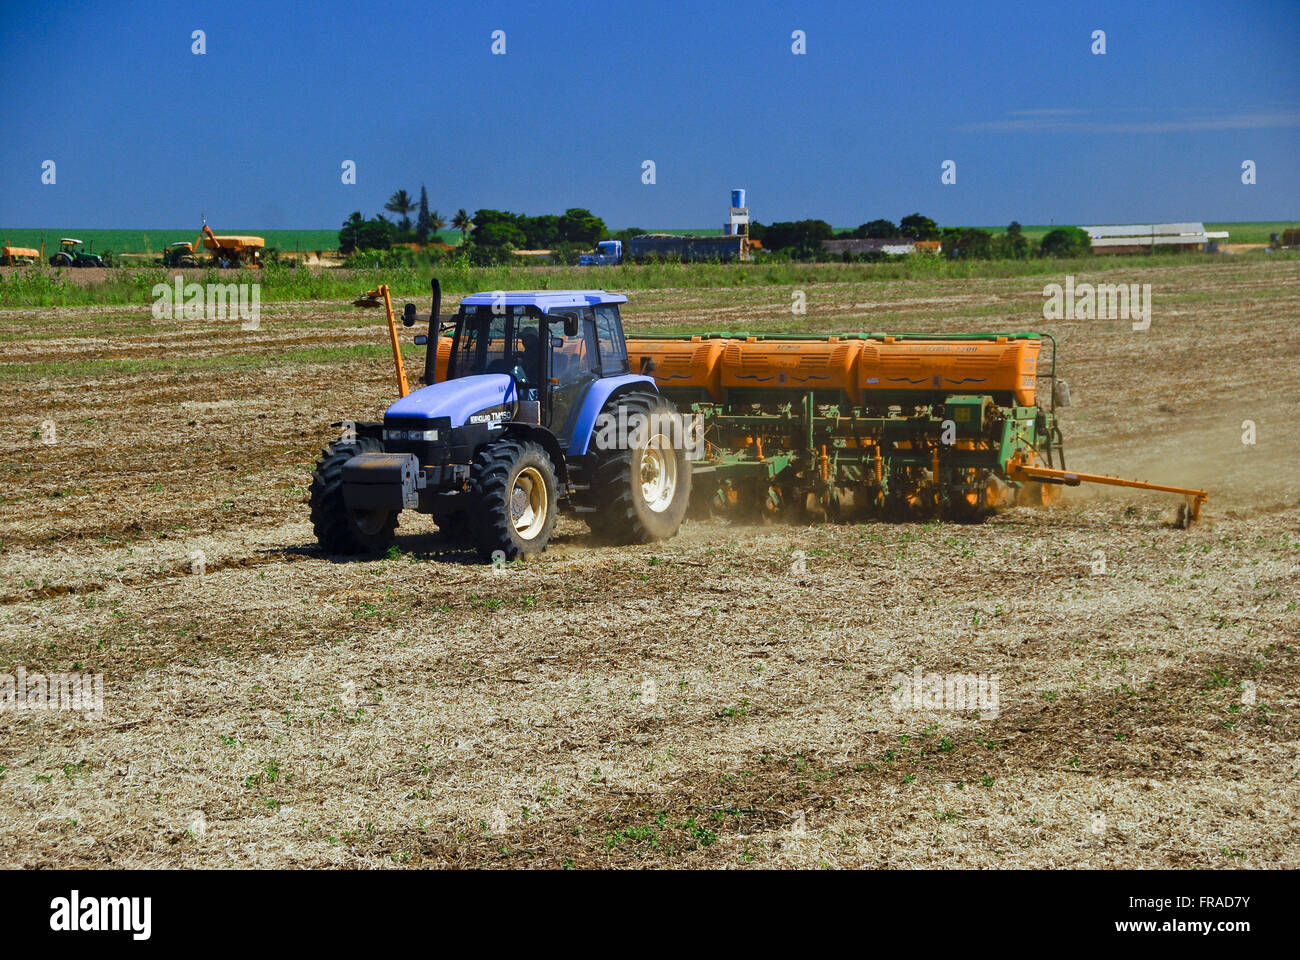 Tractor with planter performing planting grain in the countryside Stock Photo